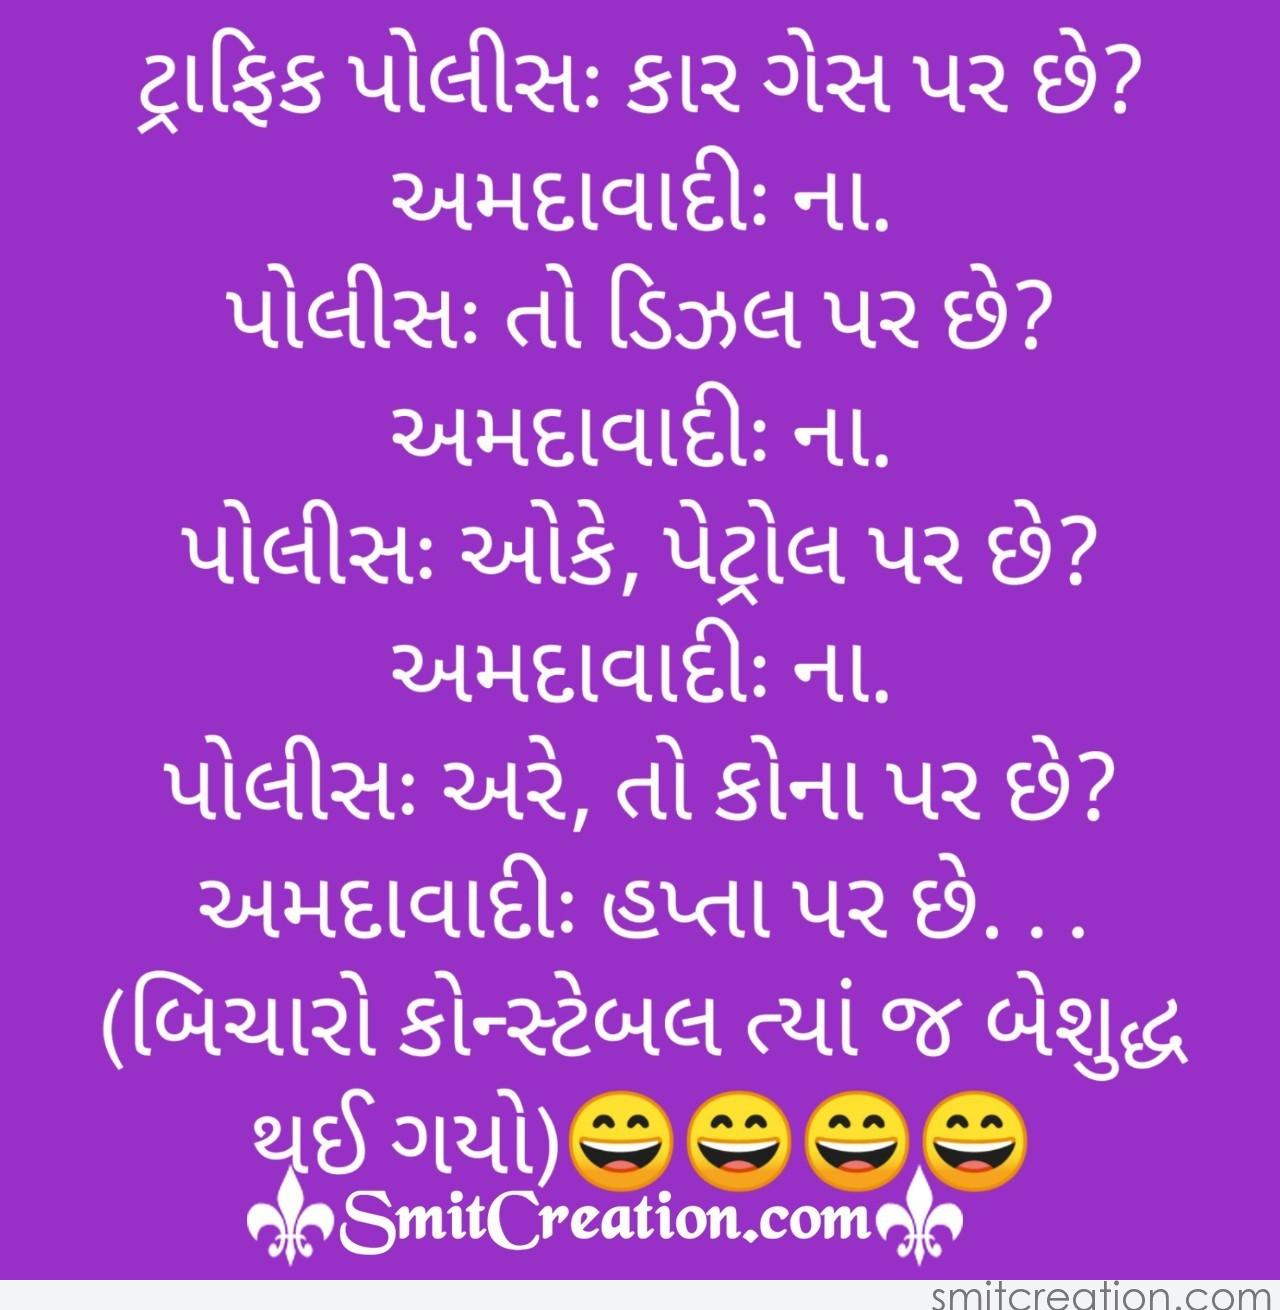 12 Funny Gujarati Jokes - Pictures and Graphics for different festivals